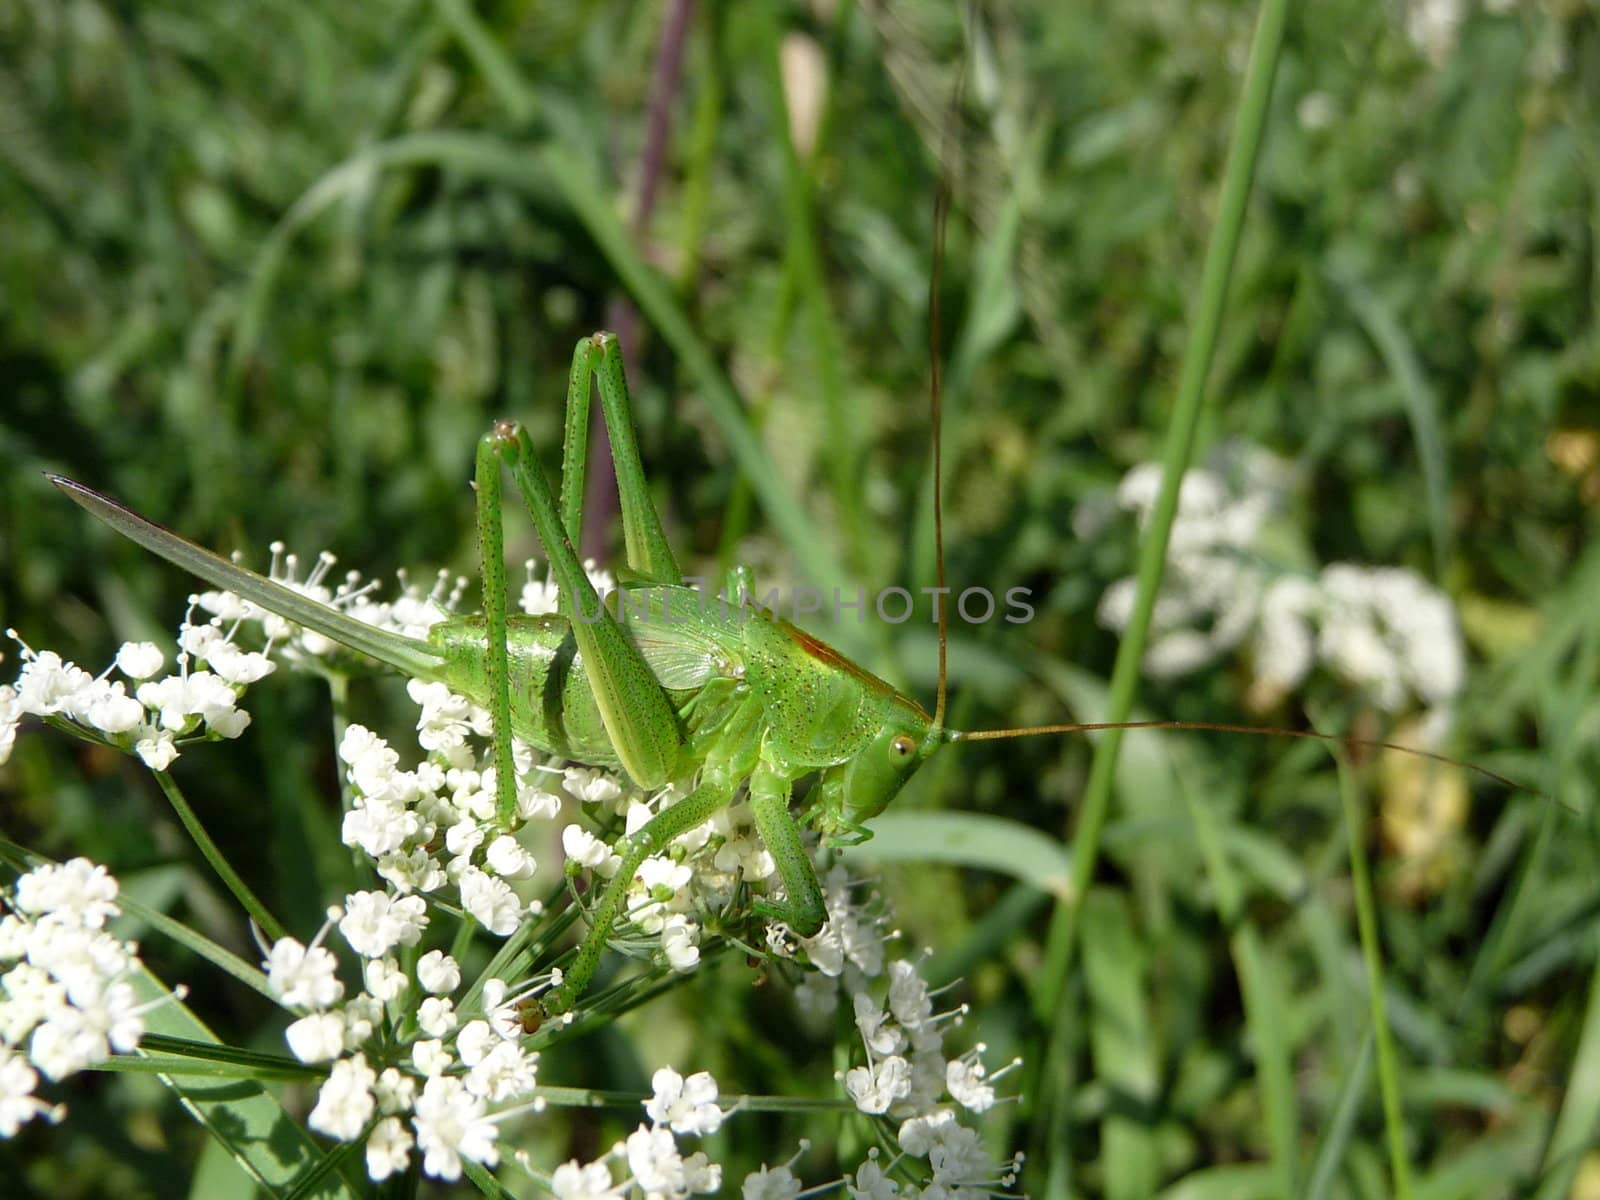 Cute green grasshopper sits on the white flowers